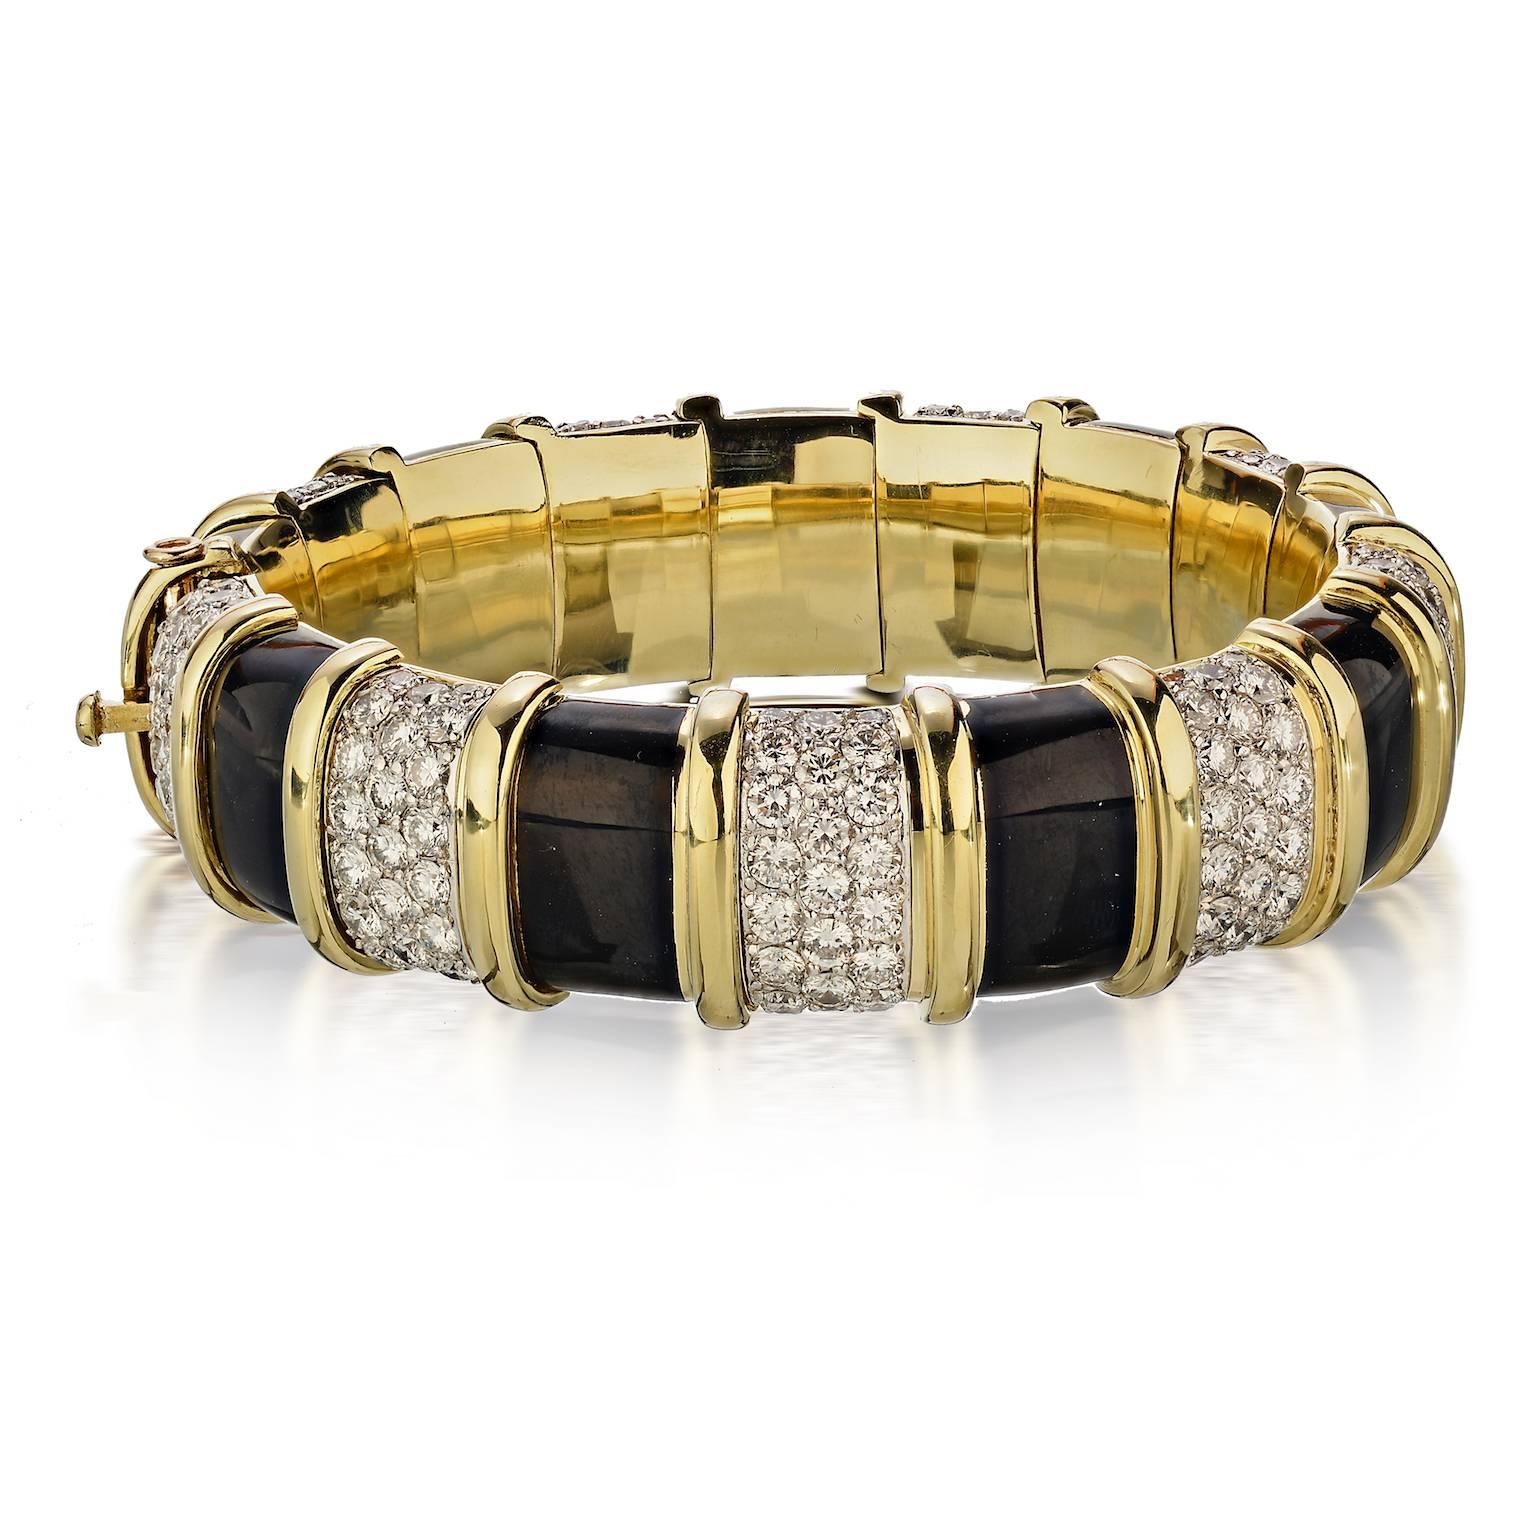 Tiffany & Co. Schlumberger Black Enamel and Diamond Bangle Bracelet in Platinum, 18K Yellow Gold with 207 Diamonds Apron. 22 Ct. With Tiffany fitted box)